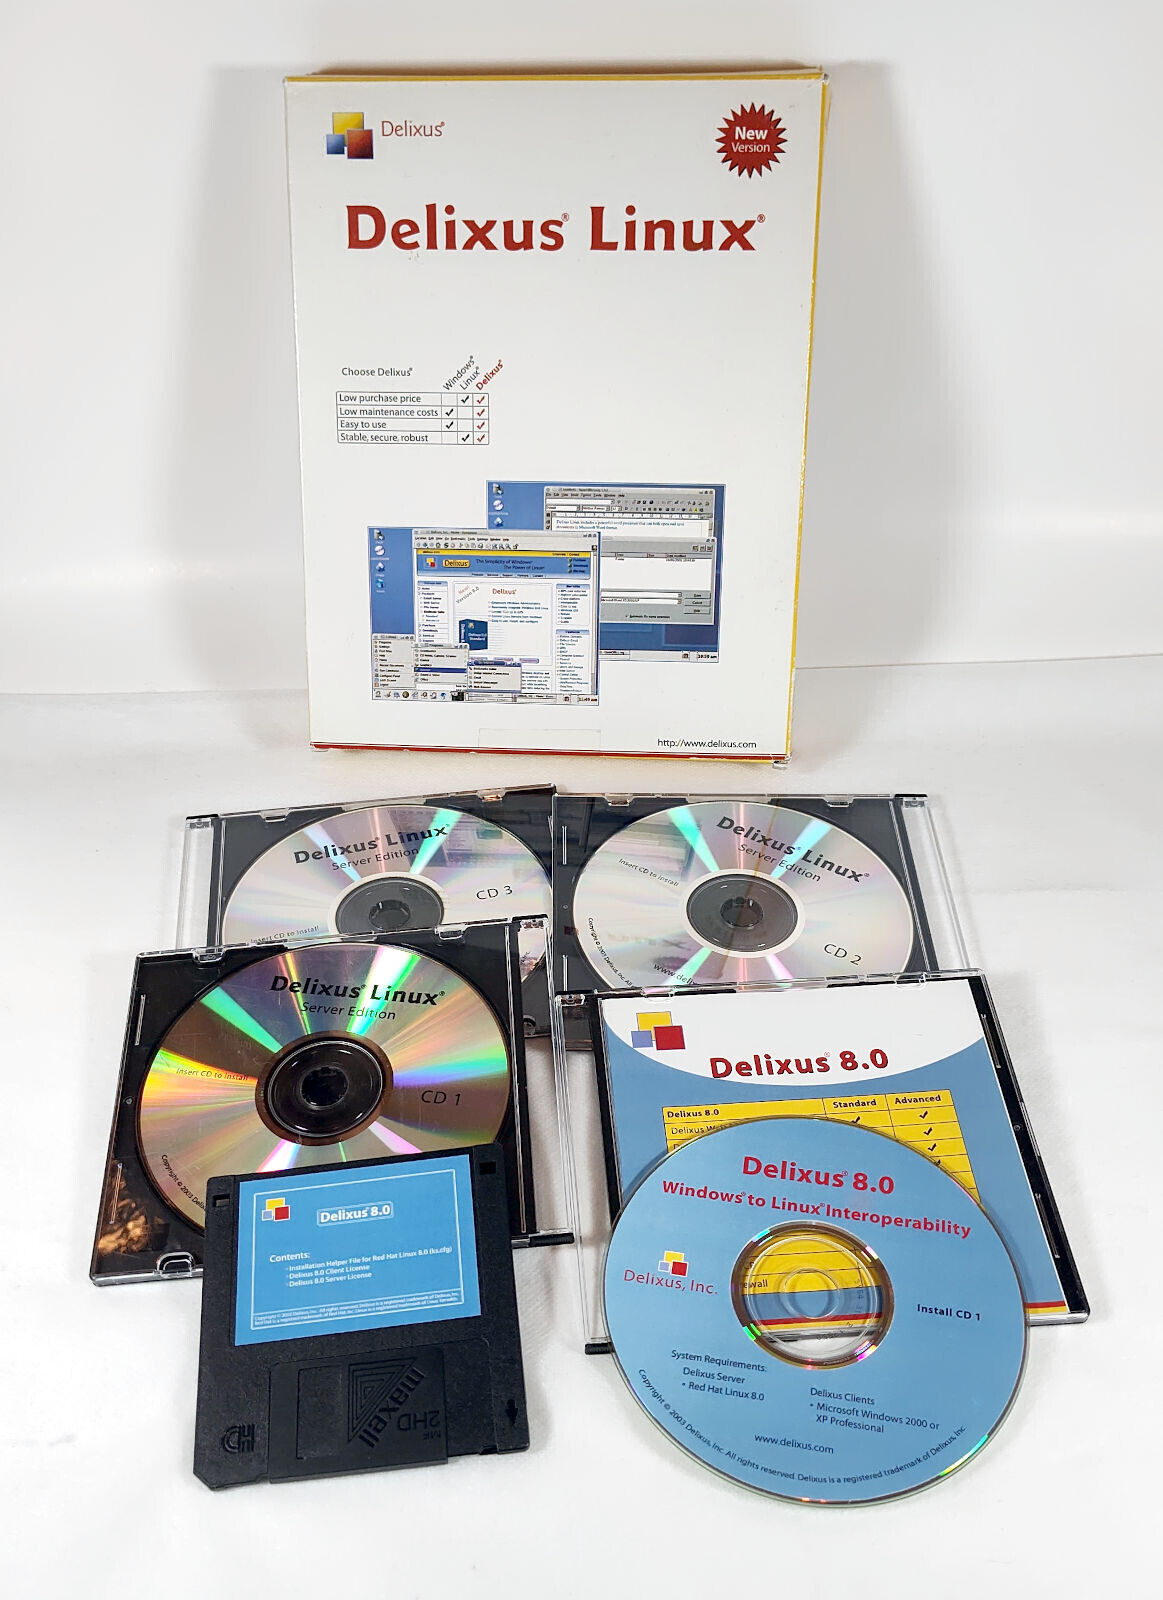 Delixus Linux 8.0 (2003) with CDs, floppy - Extremely Rare HTF OOP